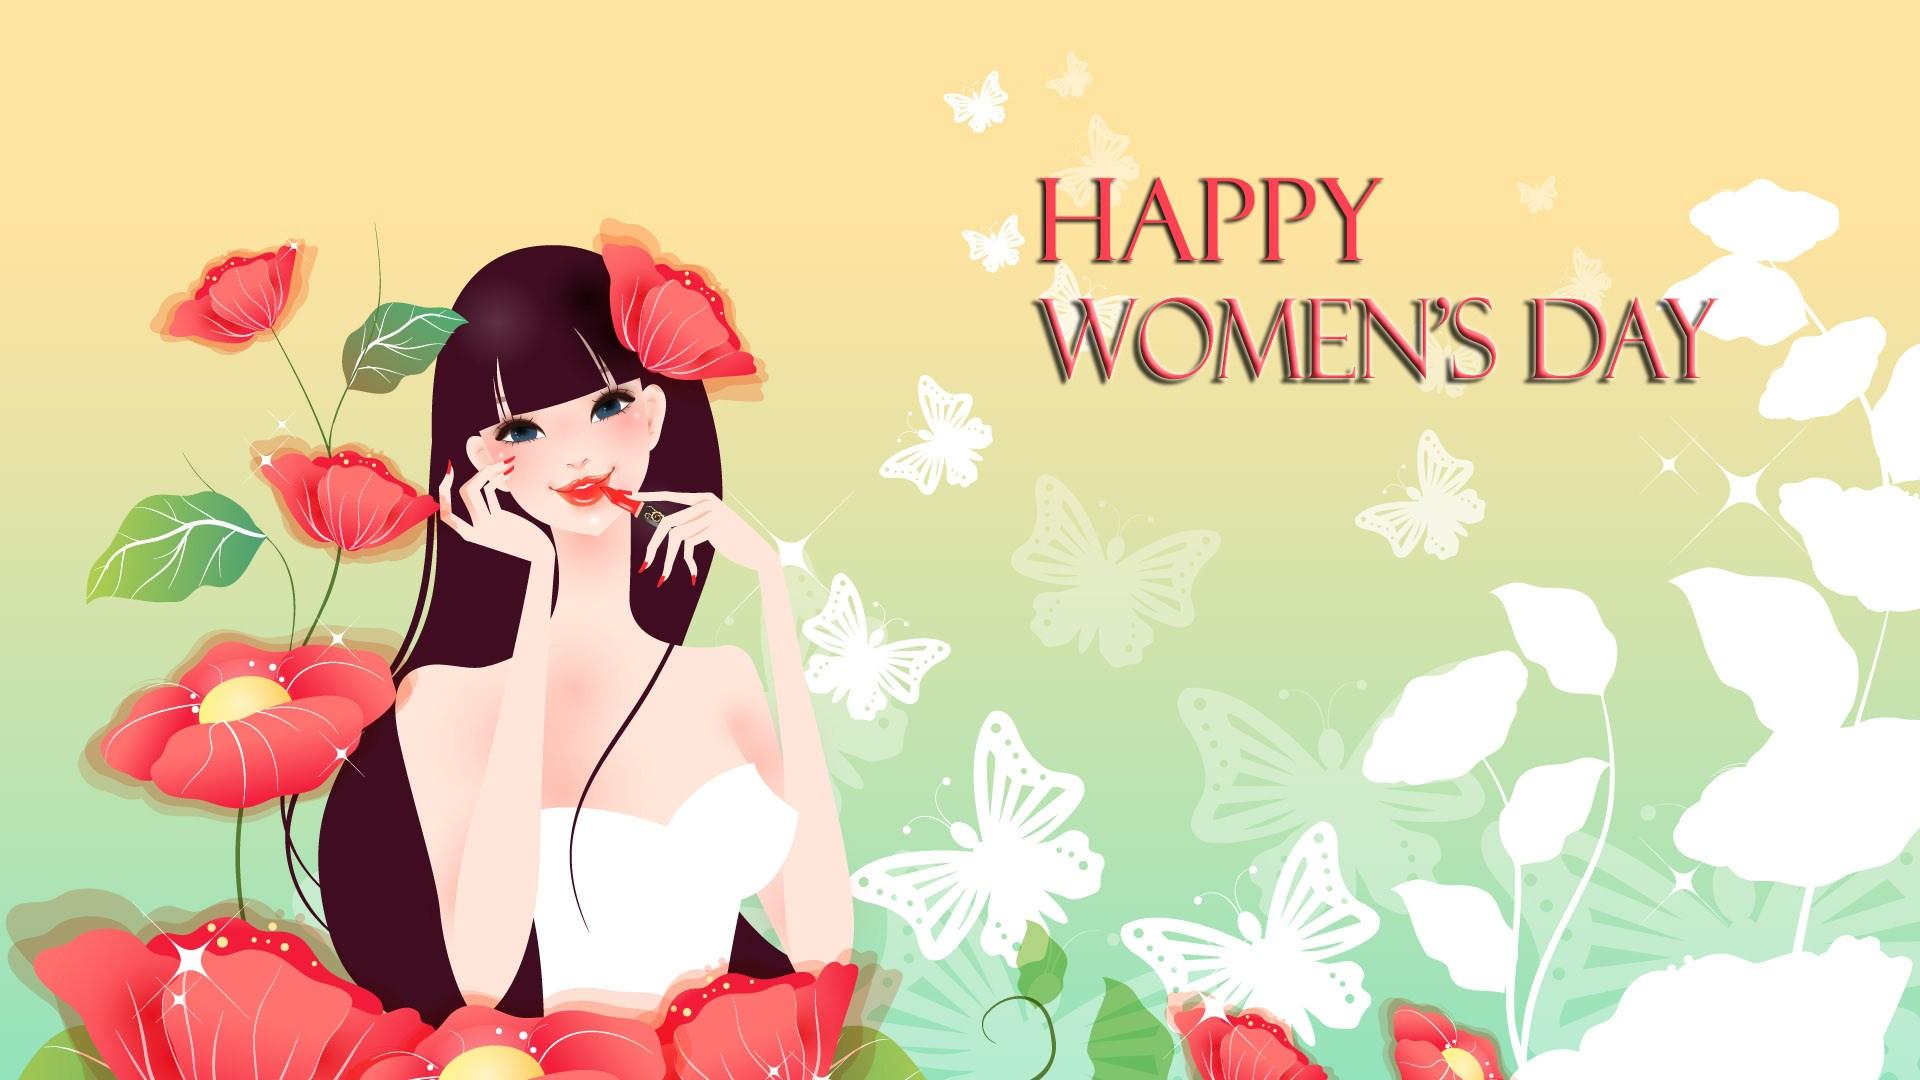 Happy Women's Day Image, Theme, Wallpaper for Facebook